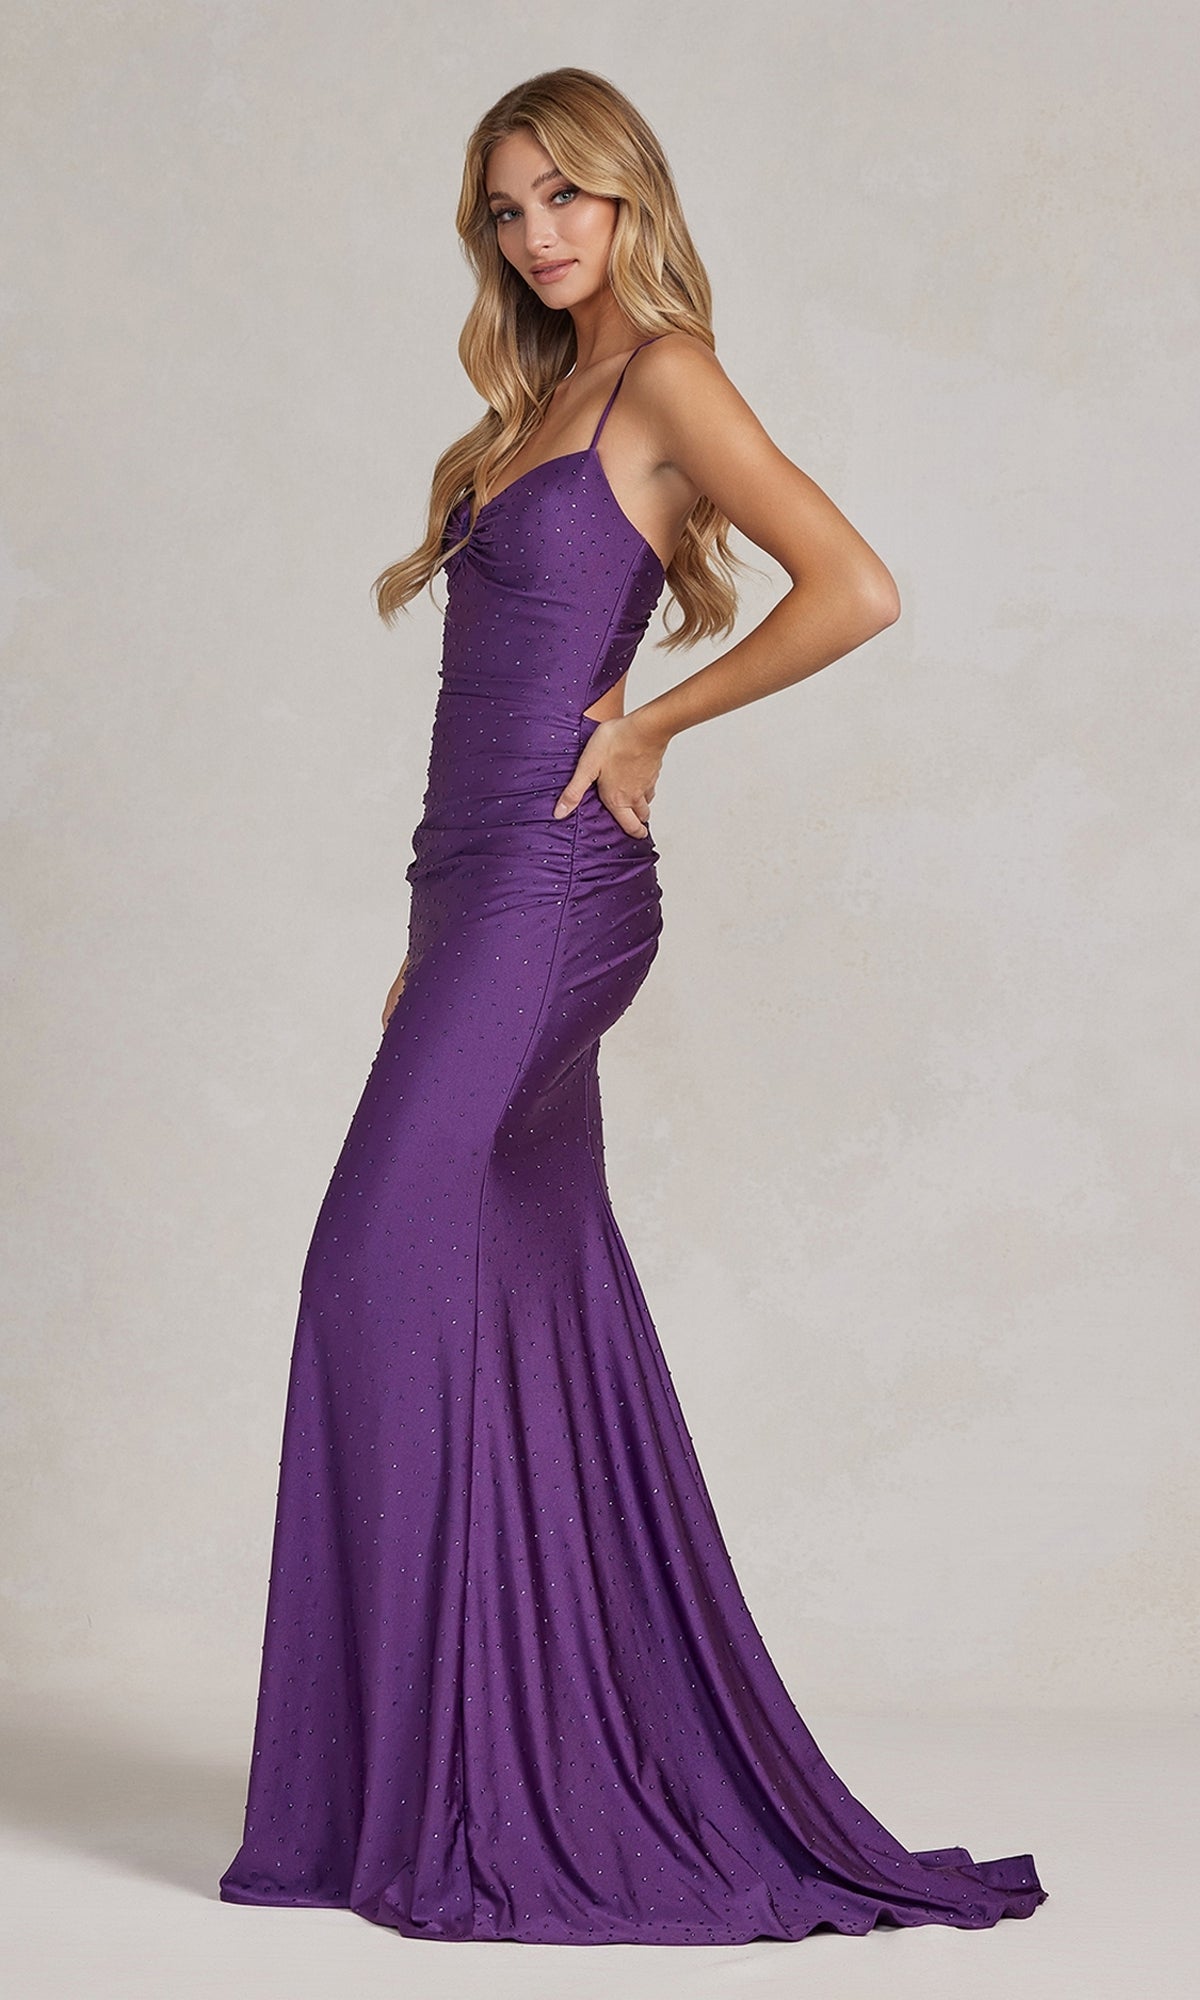 Beaded Sleek Long Formal Gown with Notched V-Neck